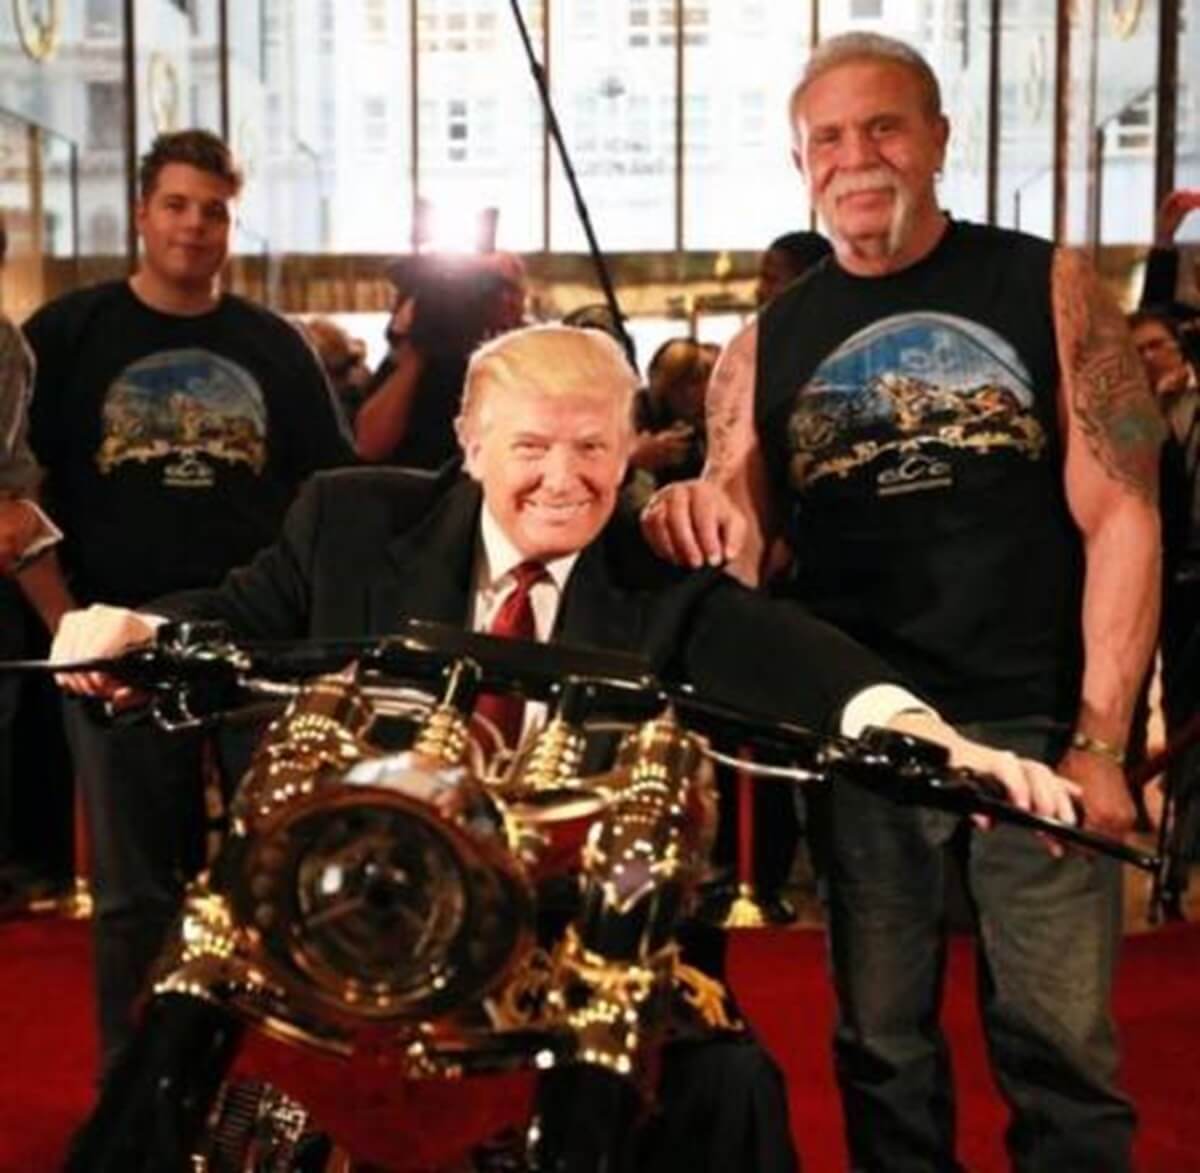 Orange County Choppers built a custom motorcycle for Donald Trump.